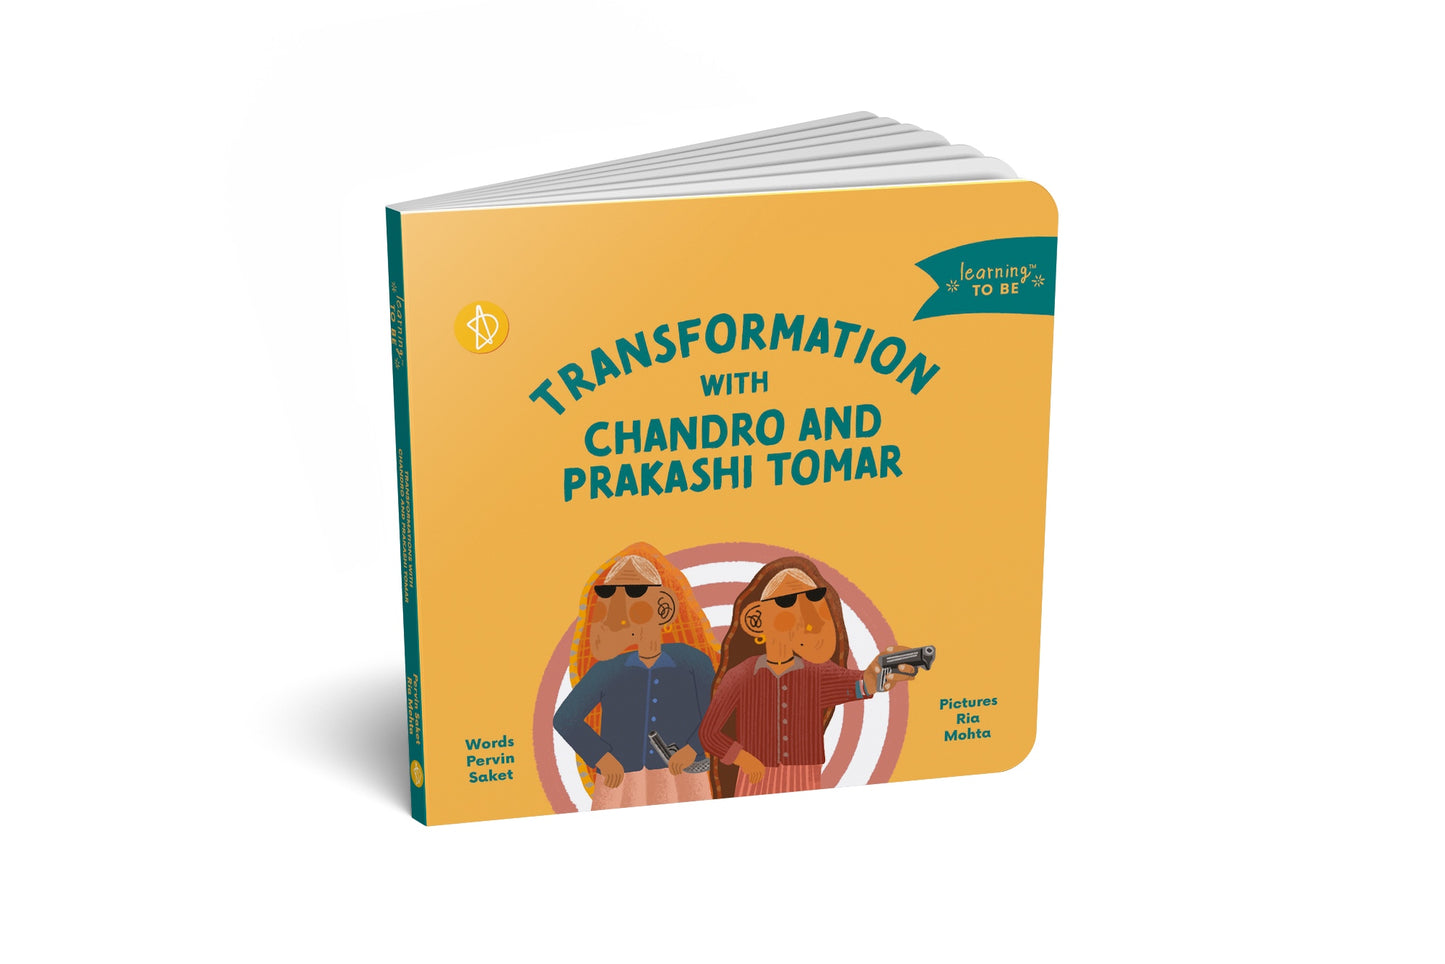 Learning TO BE: Transformation with Chandro and Prakashi Tomar (sharpshooting champions from rural India)